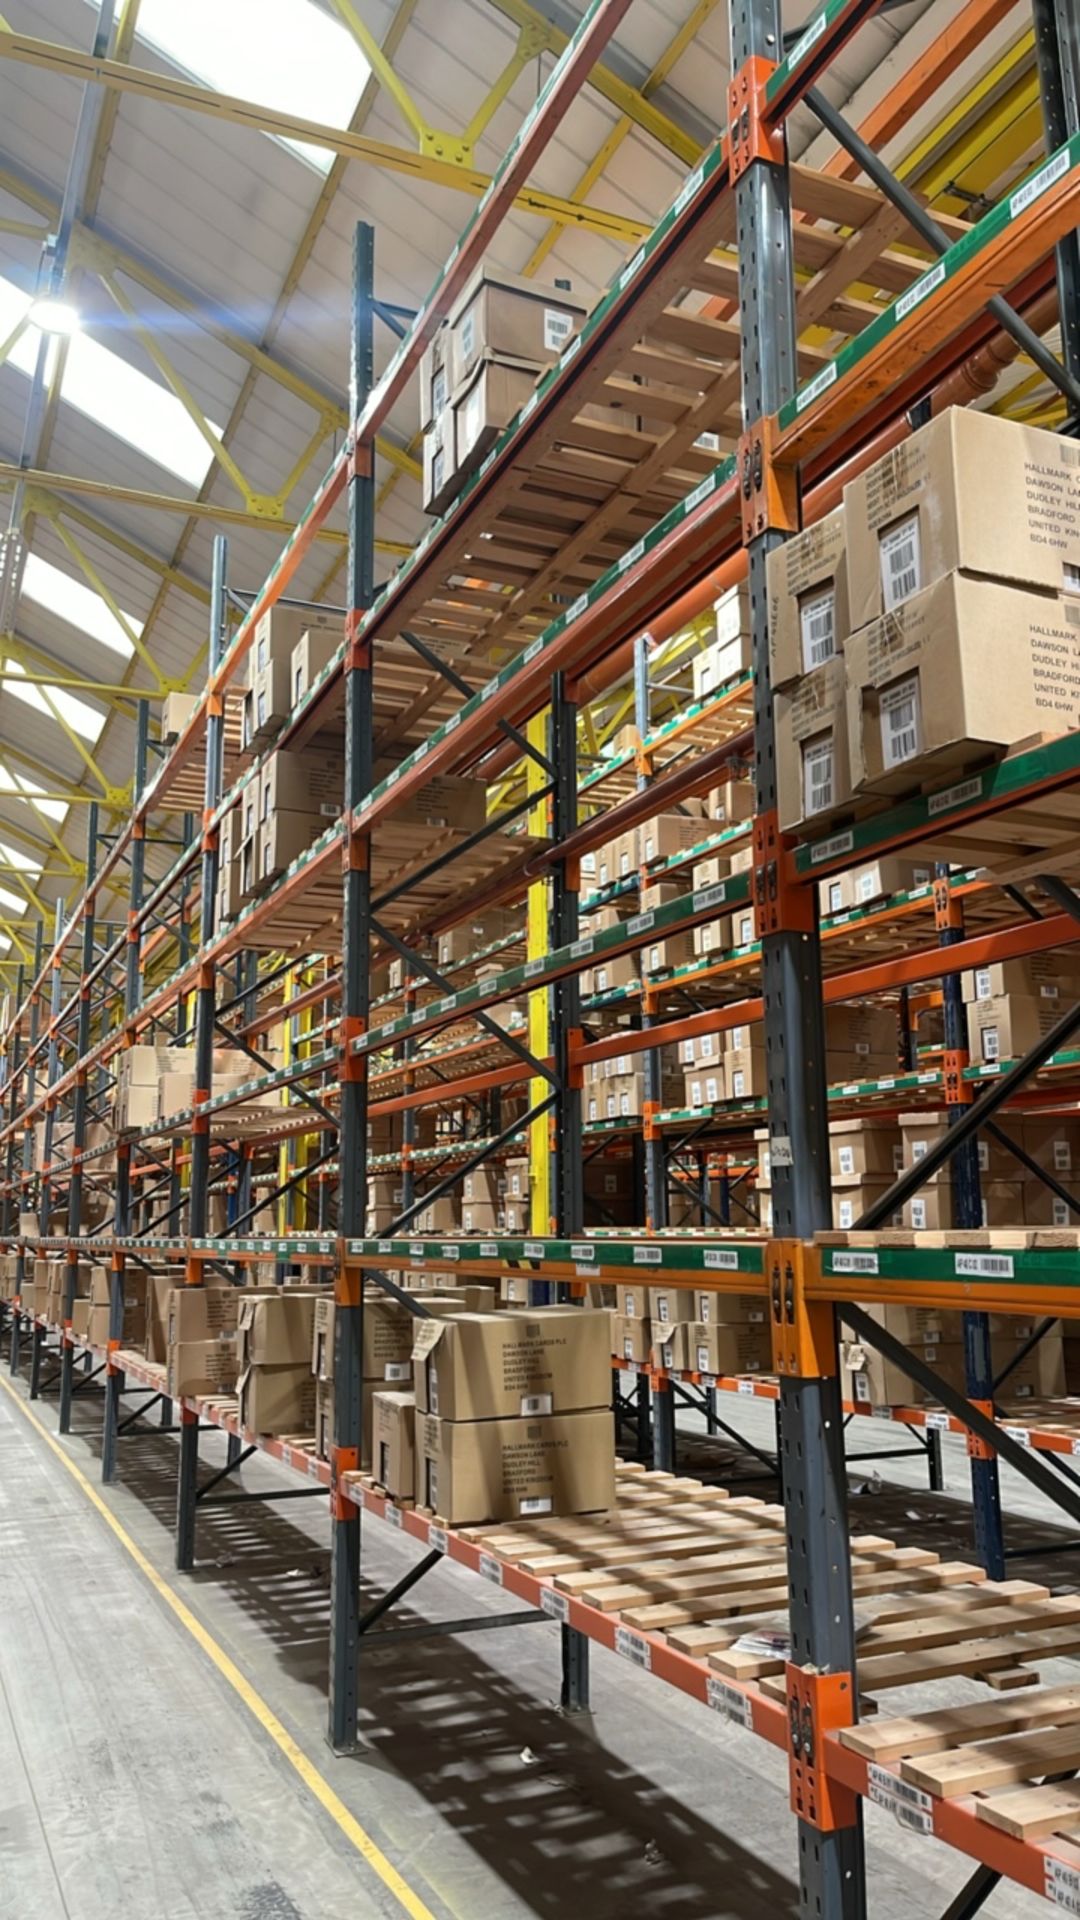 Run Of 20 Bays Of Boltless Industrial Pallet Racking - Image 10 of 11